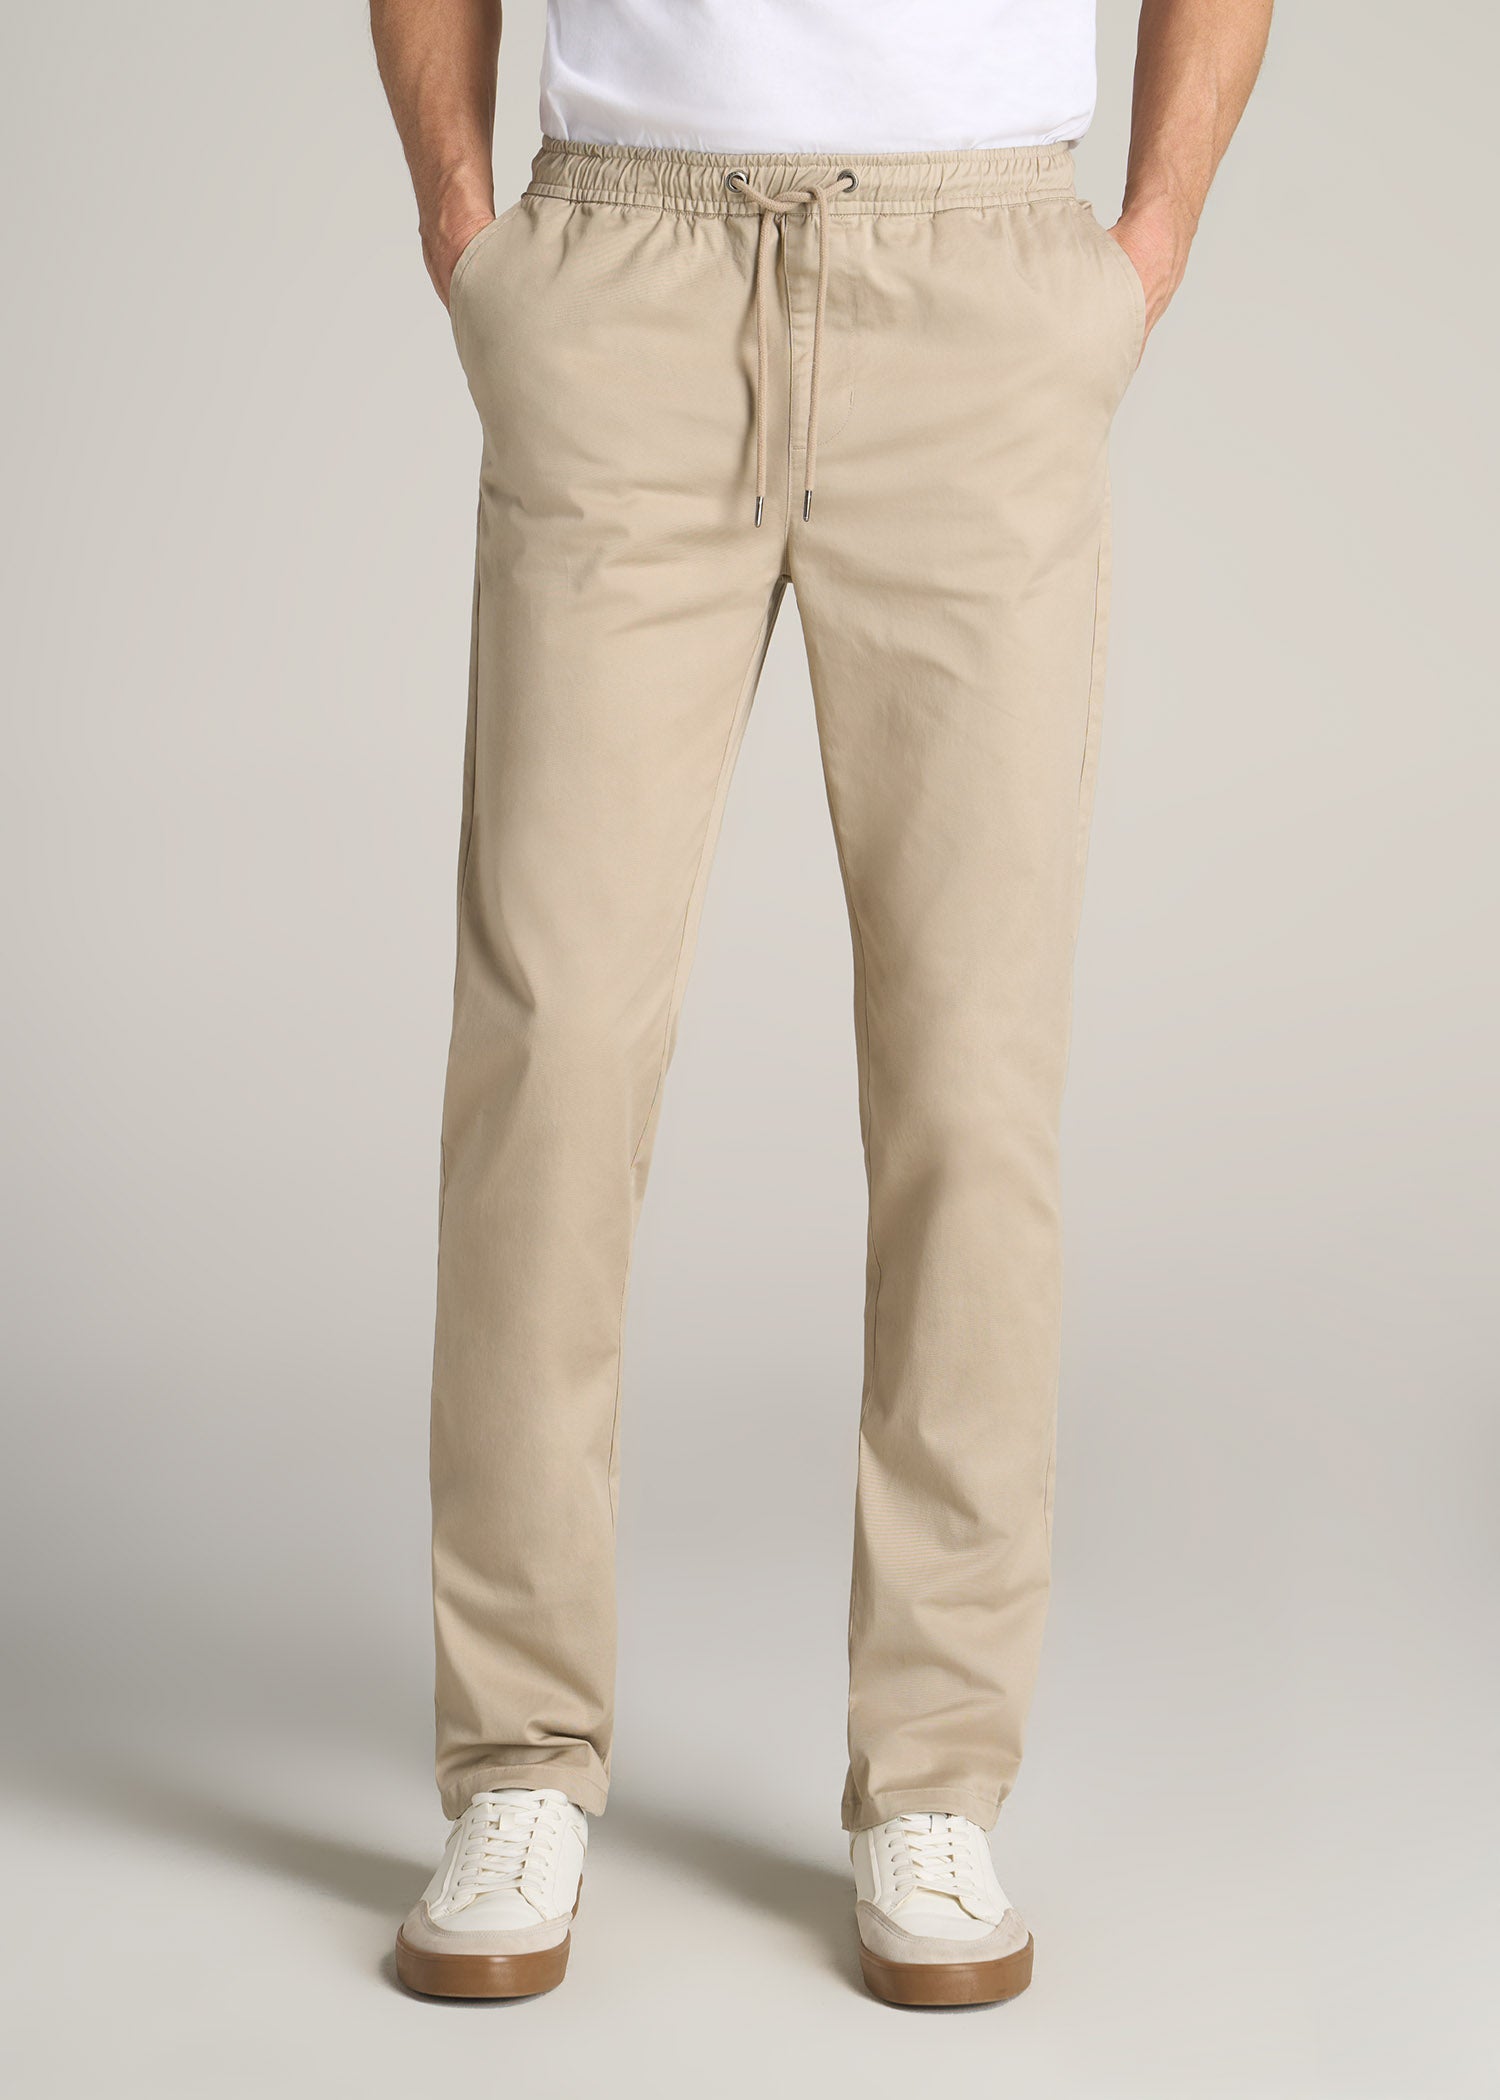 Stretch Pull On TAPERED-FIT Deck Pants For Tall Men in Light Khaki